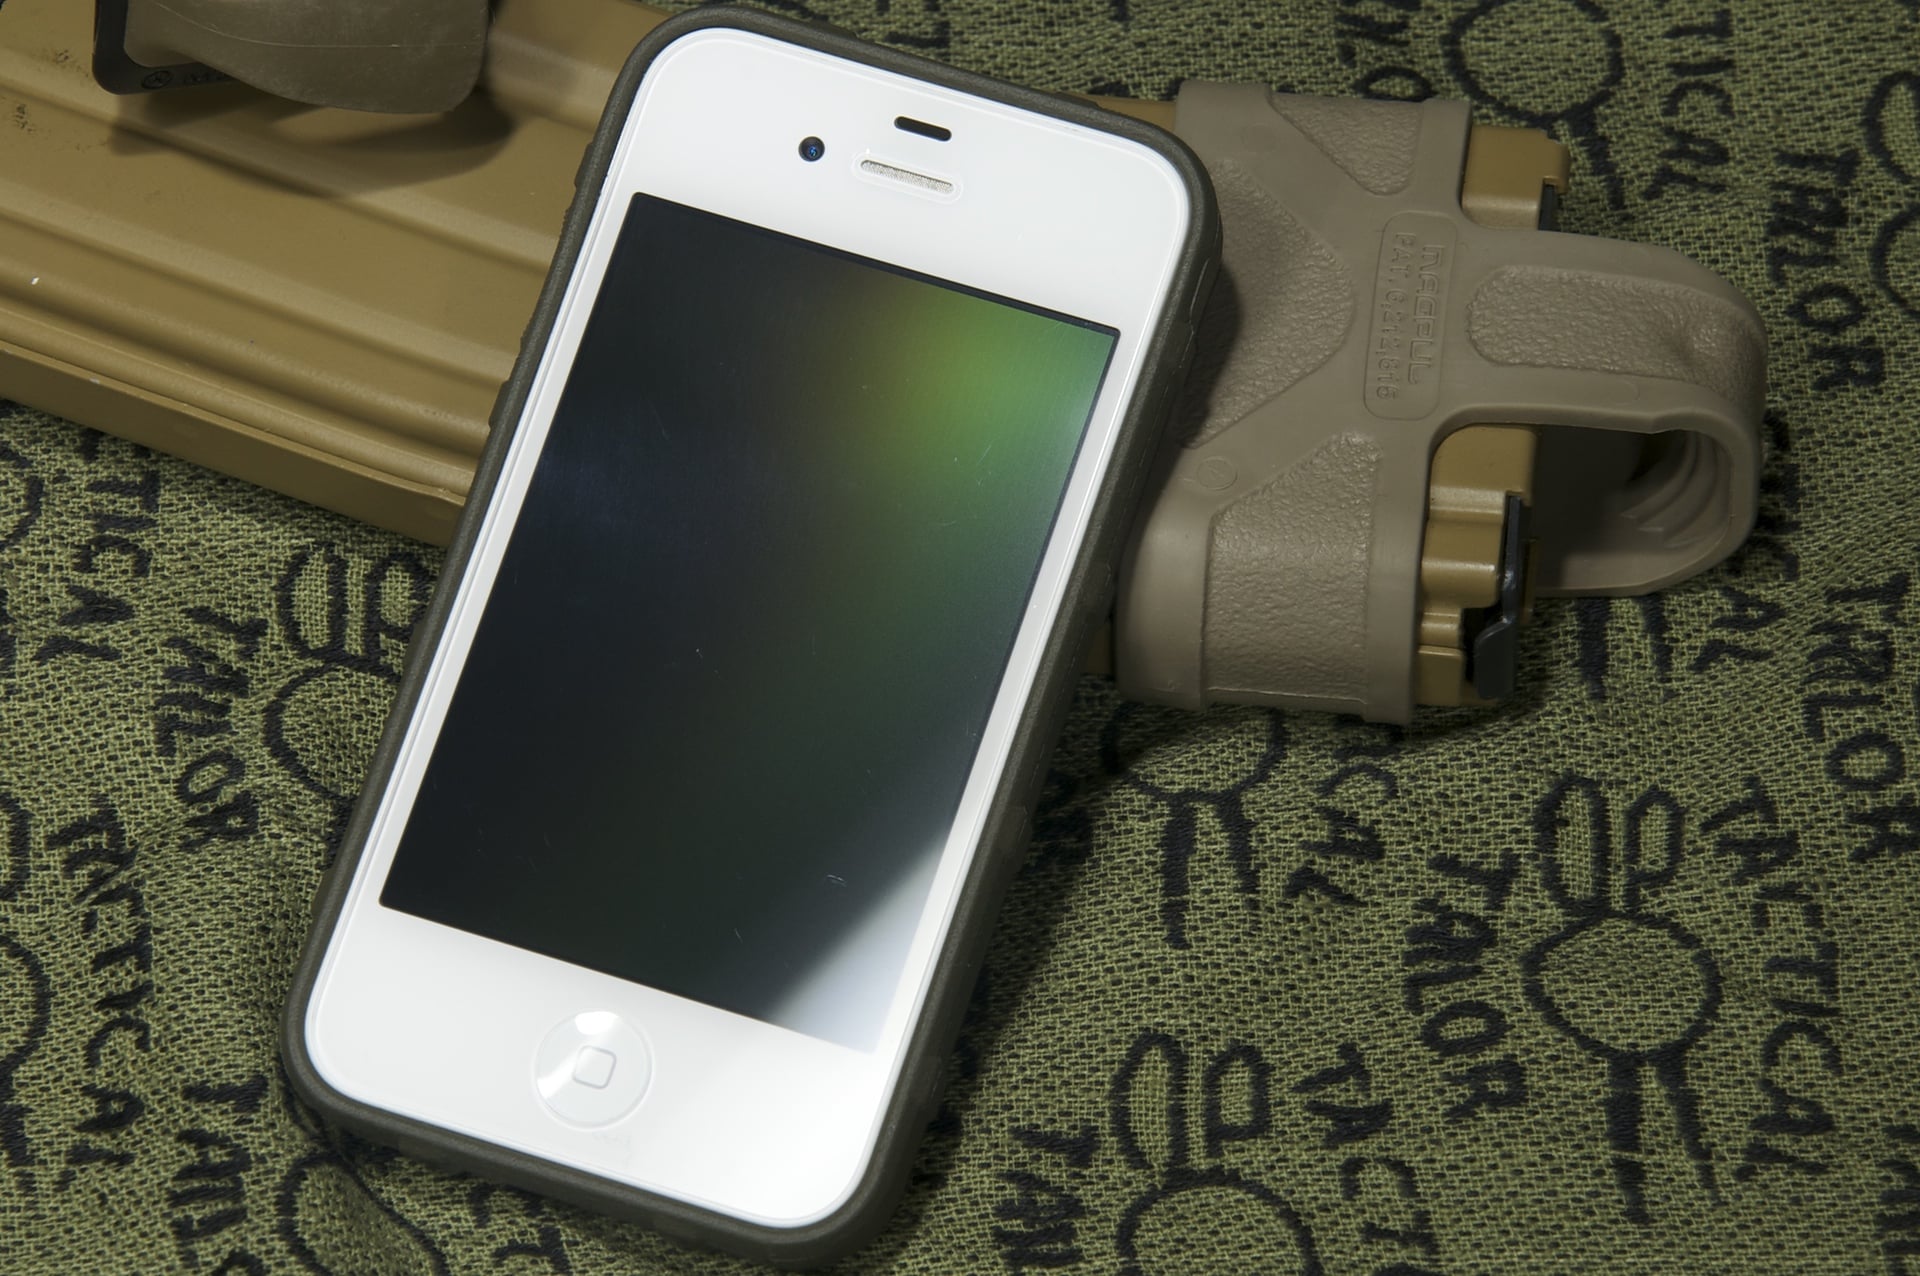 Magpul Executive Field Case For iPhone 4/4S